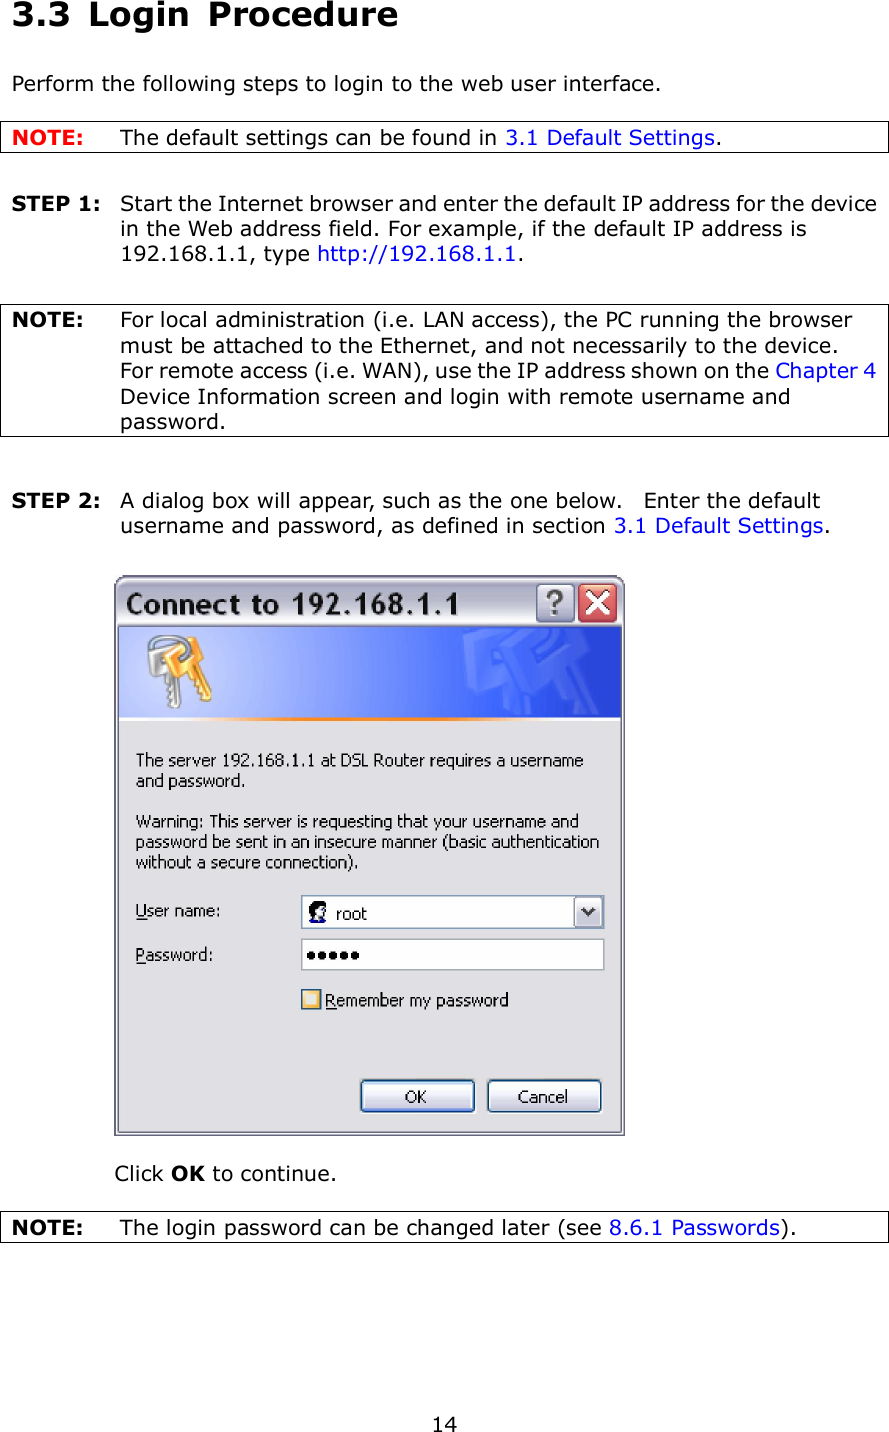  14 3.3  Login  Procedure Perform the following steps to login to the web user interface.      NOTE:  The default settings can be found in 3.1 Default Settings.     STEP 1:    Start the Internet browser and enter the default IP address for the device in the Web address field. For example, if the default IP address is 192.168.1.1, type http://192.168.1.1.  NOTE:  For local administration (i.e. LAN access), the PC running the browser must be attached to the Ethernet, and not necessarily to the device.     For remote access (i.e. WAN), use the IP address shown on the Chapter 4 Device Information screen and login with remote username and password.  STEP 2:    A dialog box will appear, such as the one below.    Enter the default username and password, as defined in section 3.1 Default Settings.        Click OK to continue.  NOTE:   The login password can be changed later (see 8.6.1 Passwords). 